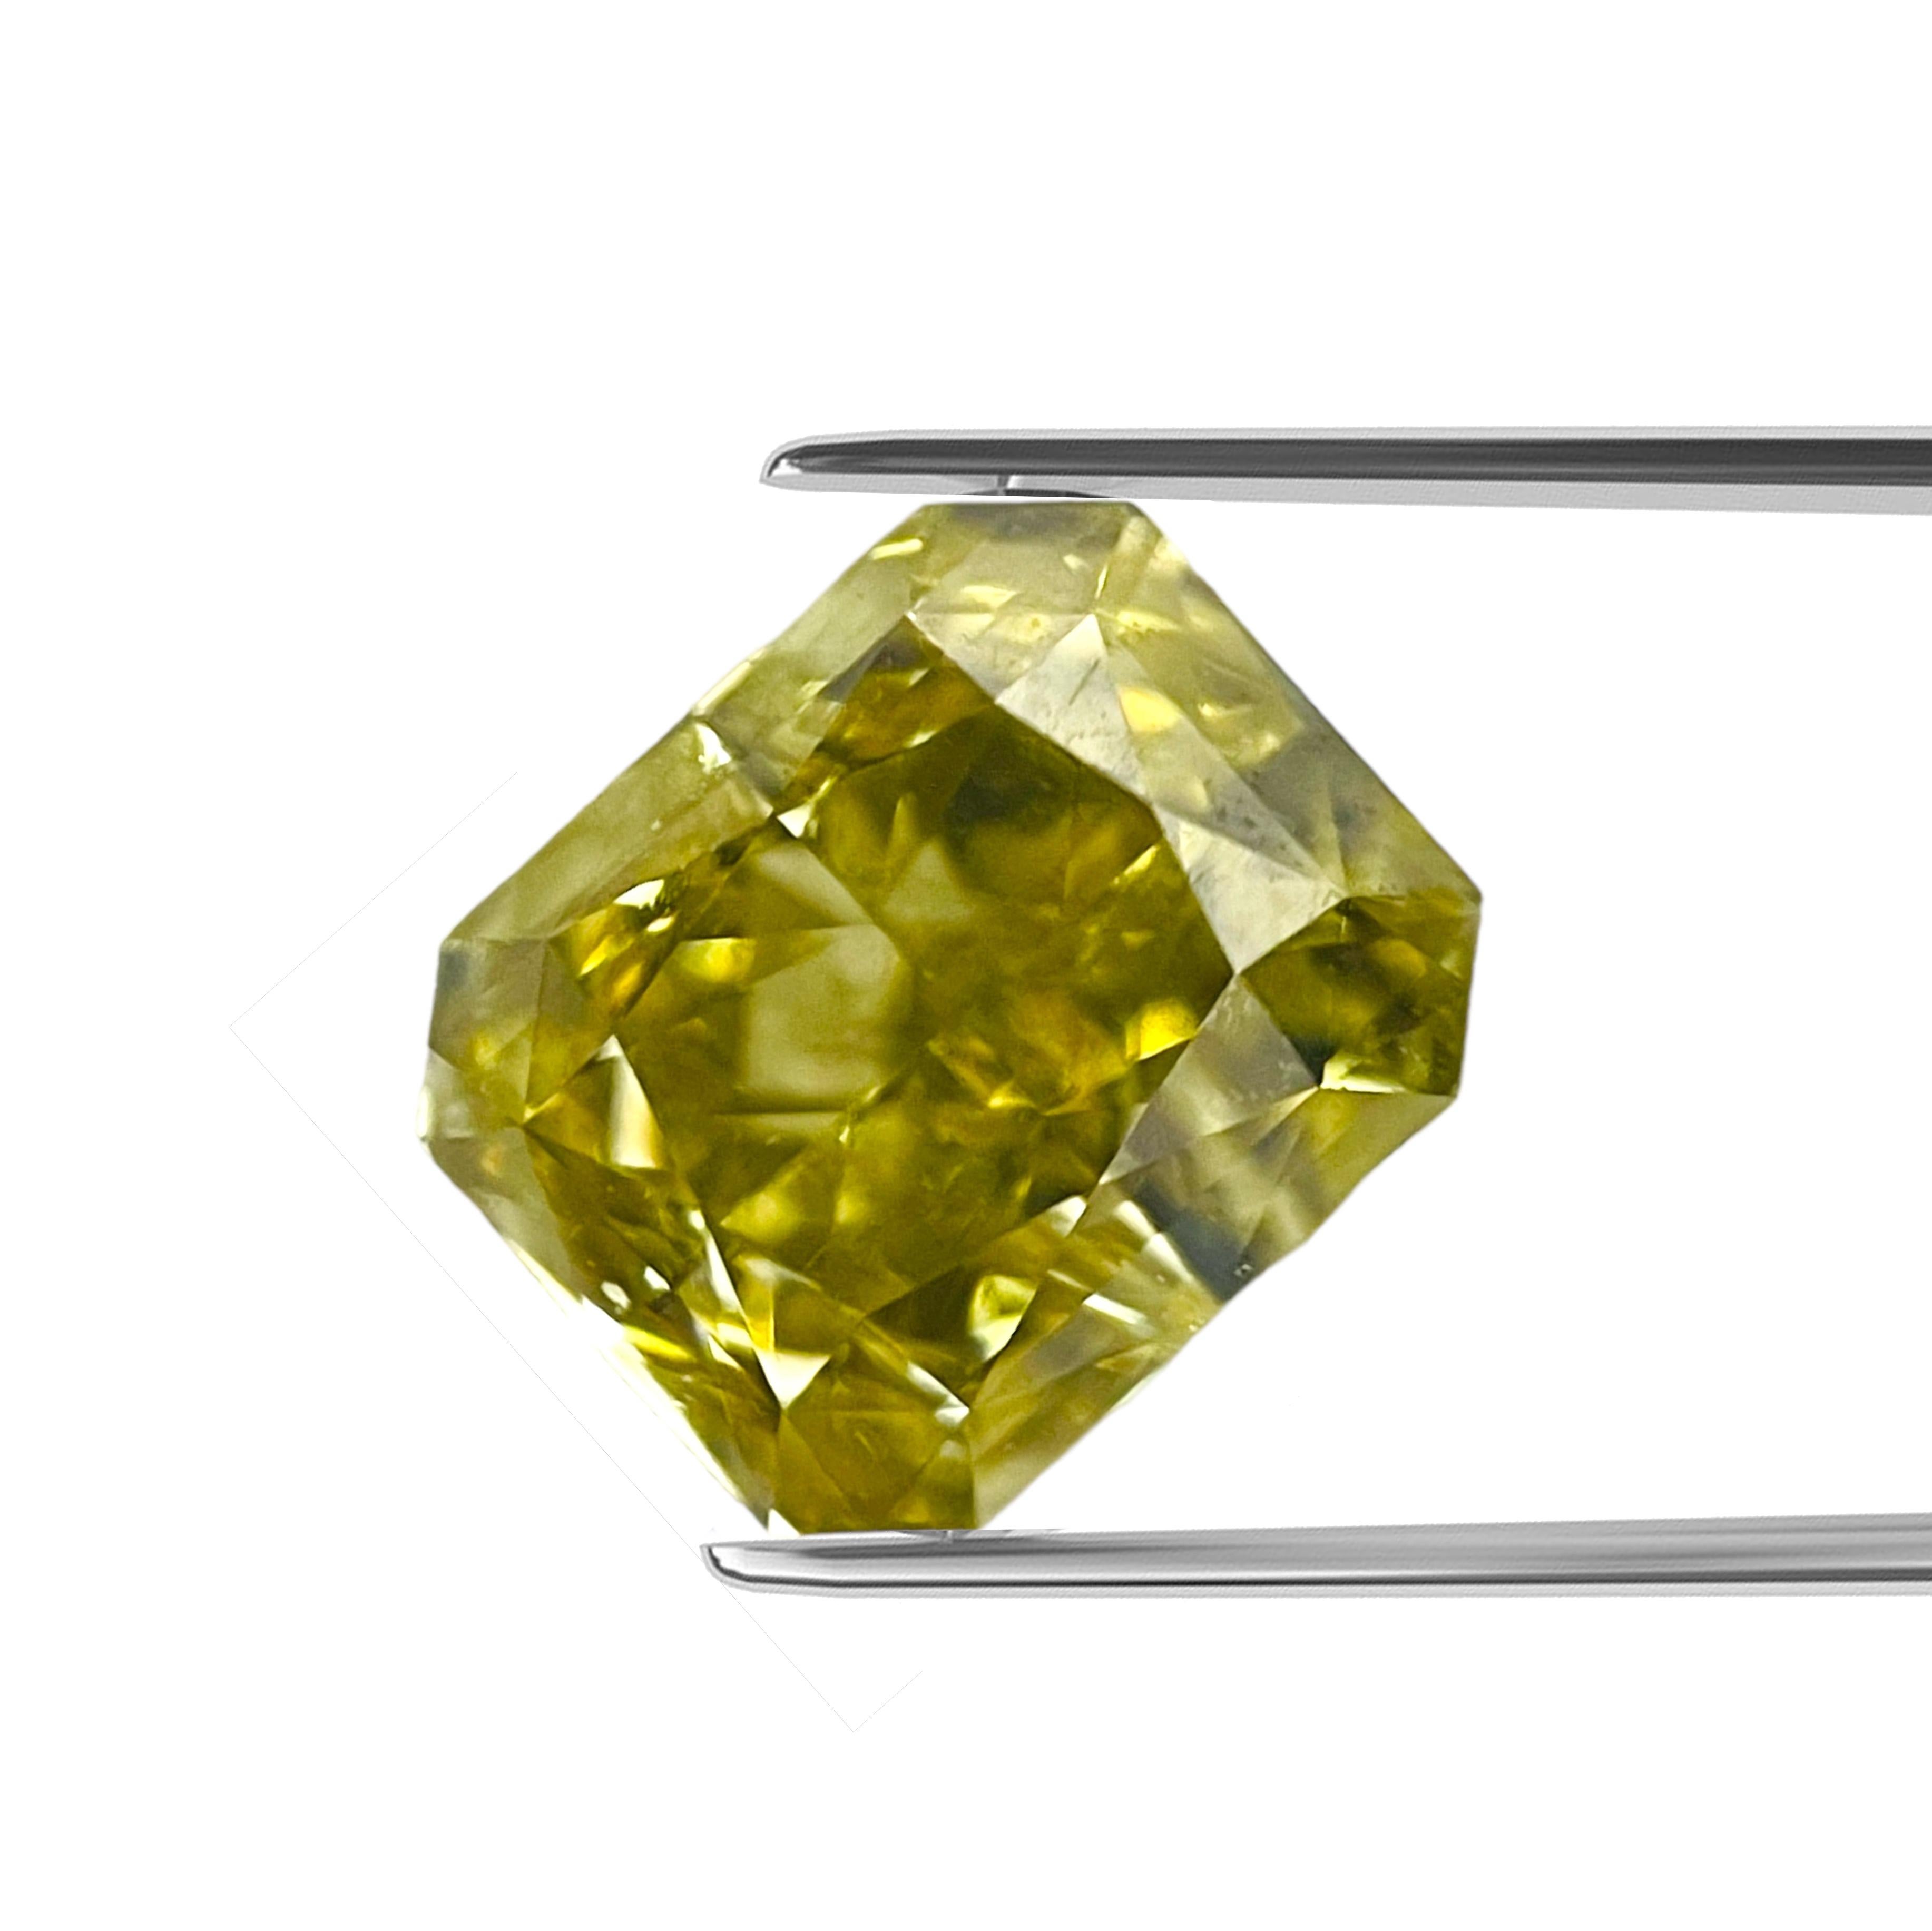 ITEM DESCRIPTION

ID #:	NYC55734
Stone Shape: CUT-CORENRED RECTANGULAR MODIFIED BRILLIANT 
Diamond Weight: 1.10ct
Clarity: VS2
Color: Fancy Brownish Yellow
Cut:	Excellent
Measurements: 6.27 x 5.21 x 3.67 mm
Depth %:	70.4%
Table %:	60%
Symmetry: Very